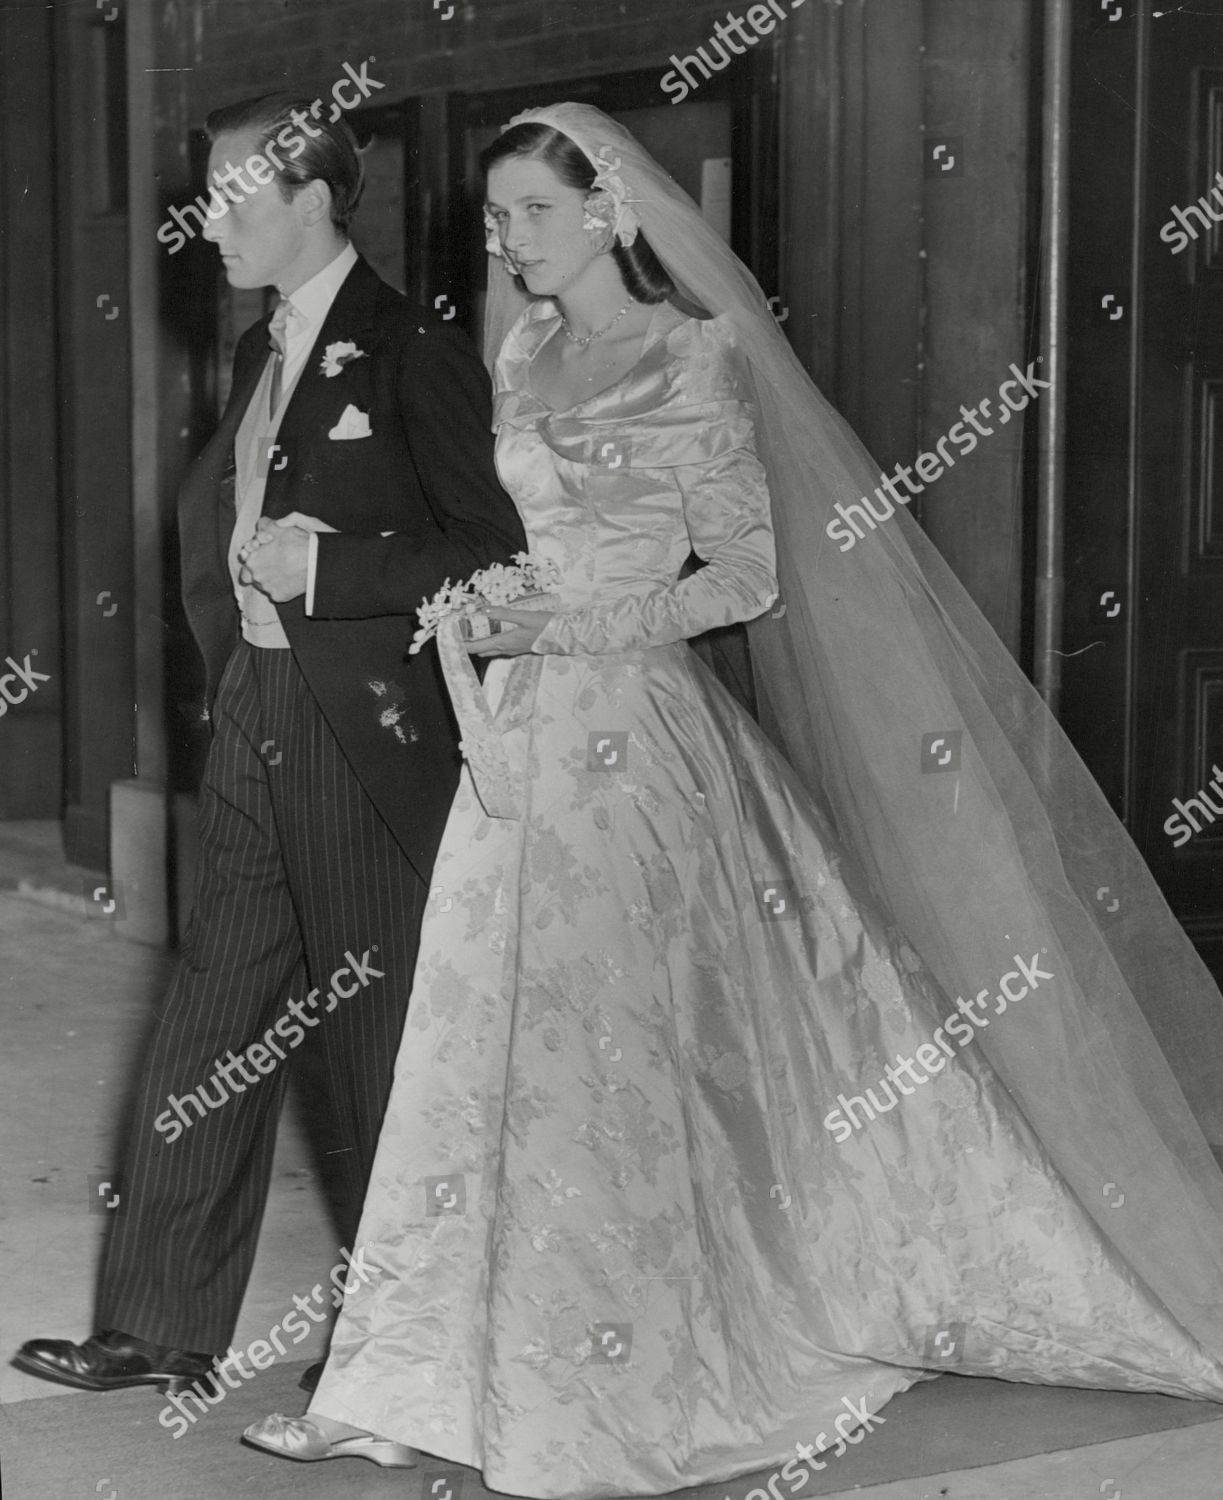 the-wedding-of-david-somerset-lady-caroline-thynne-at-st-peters-eaton-square-w1-now-11th-duke-of-beaufort-duchess-of-beaufort-box-710-617101615-a-jpg-shutterstock-editorial-9005529a.jpg